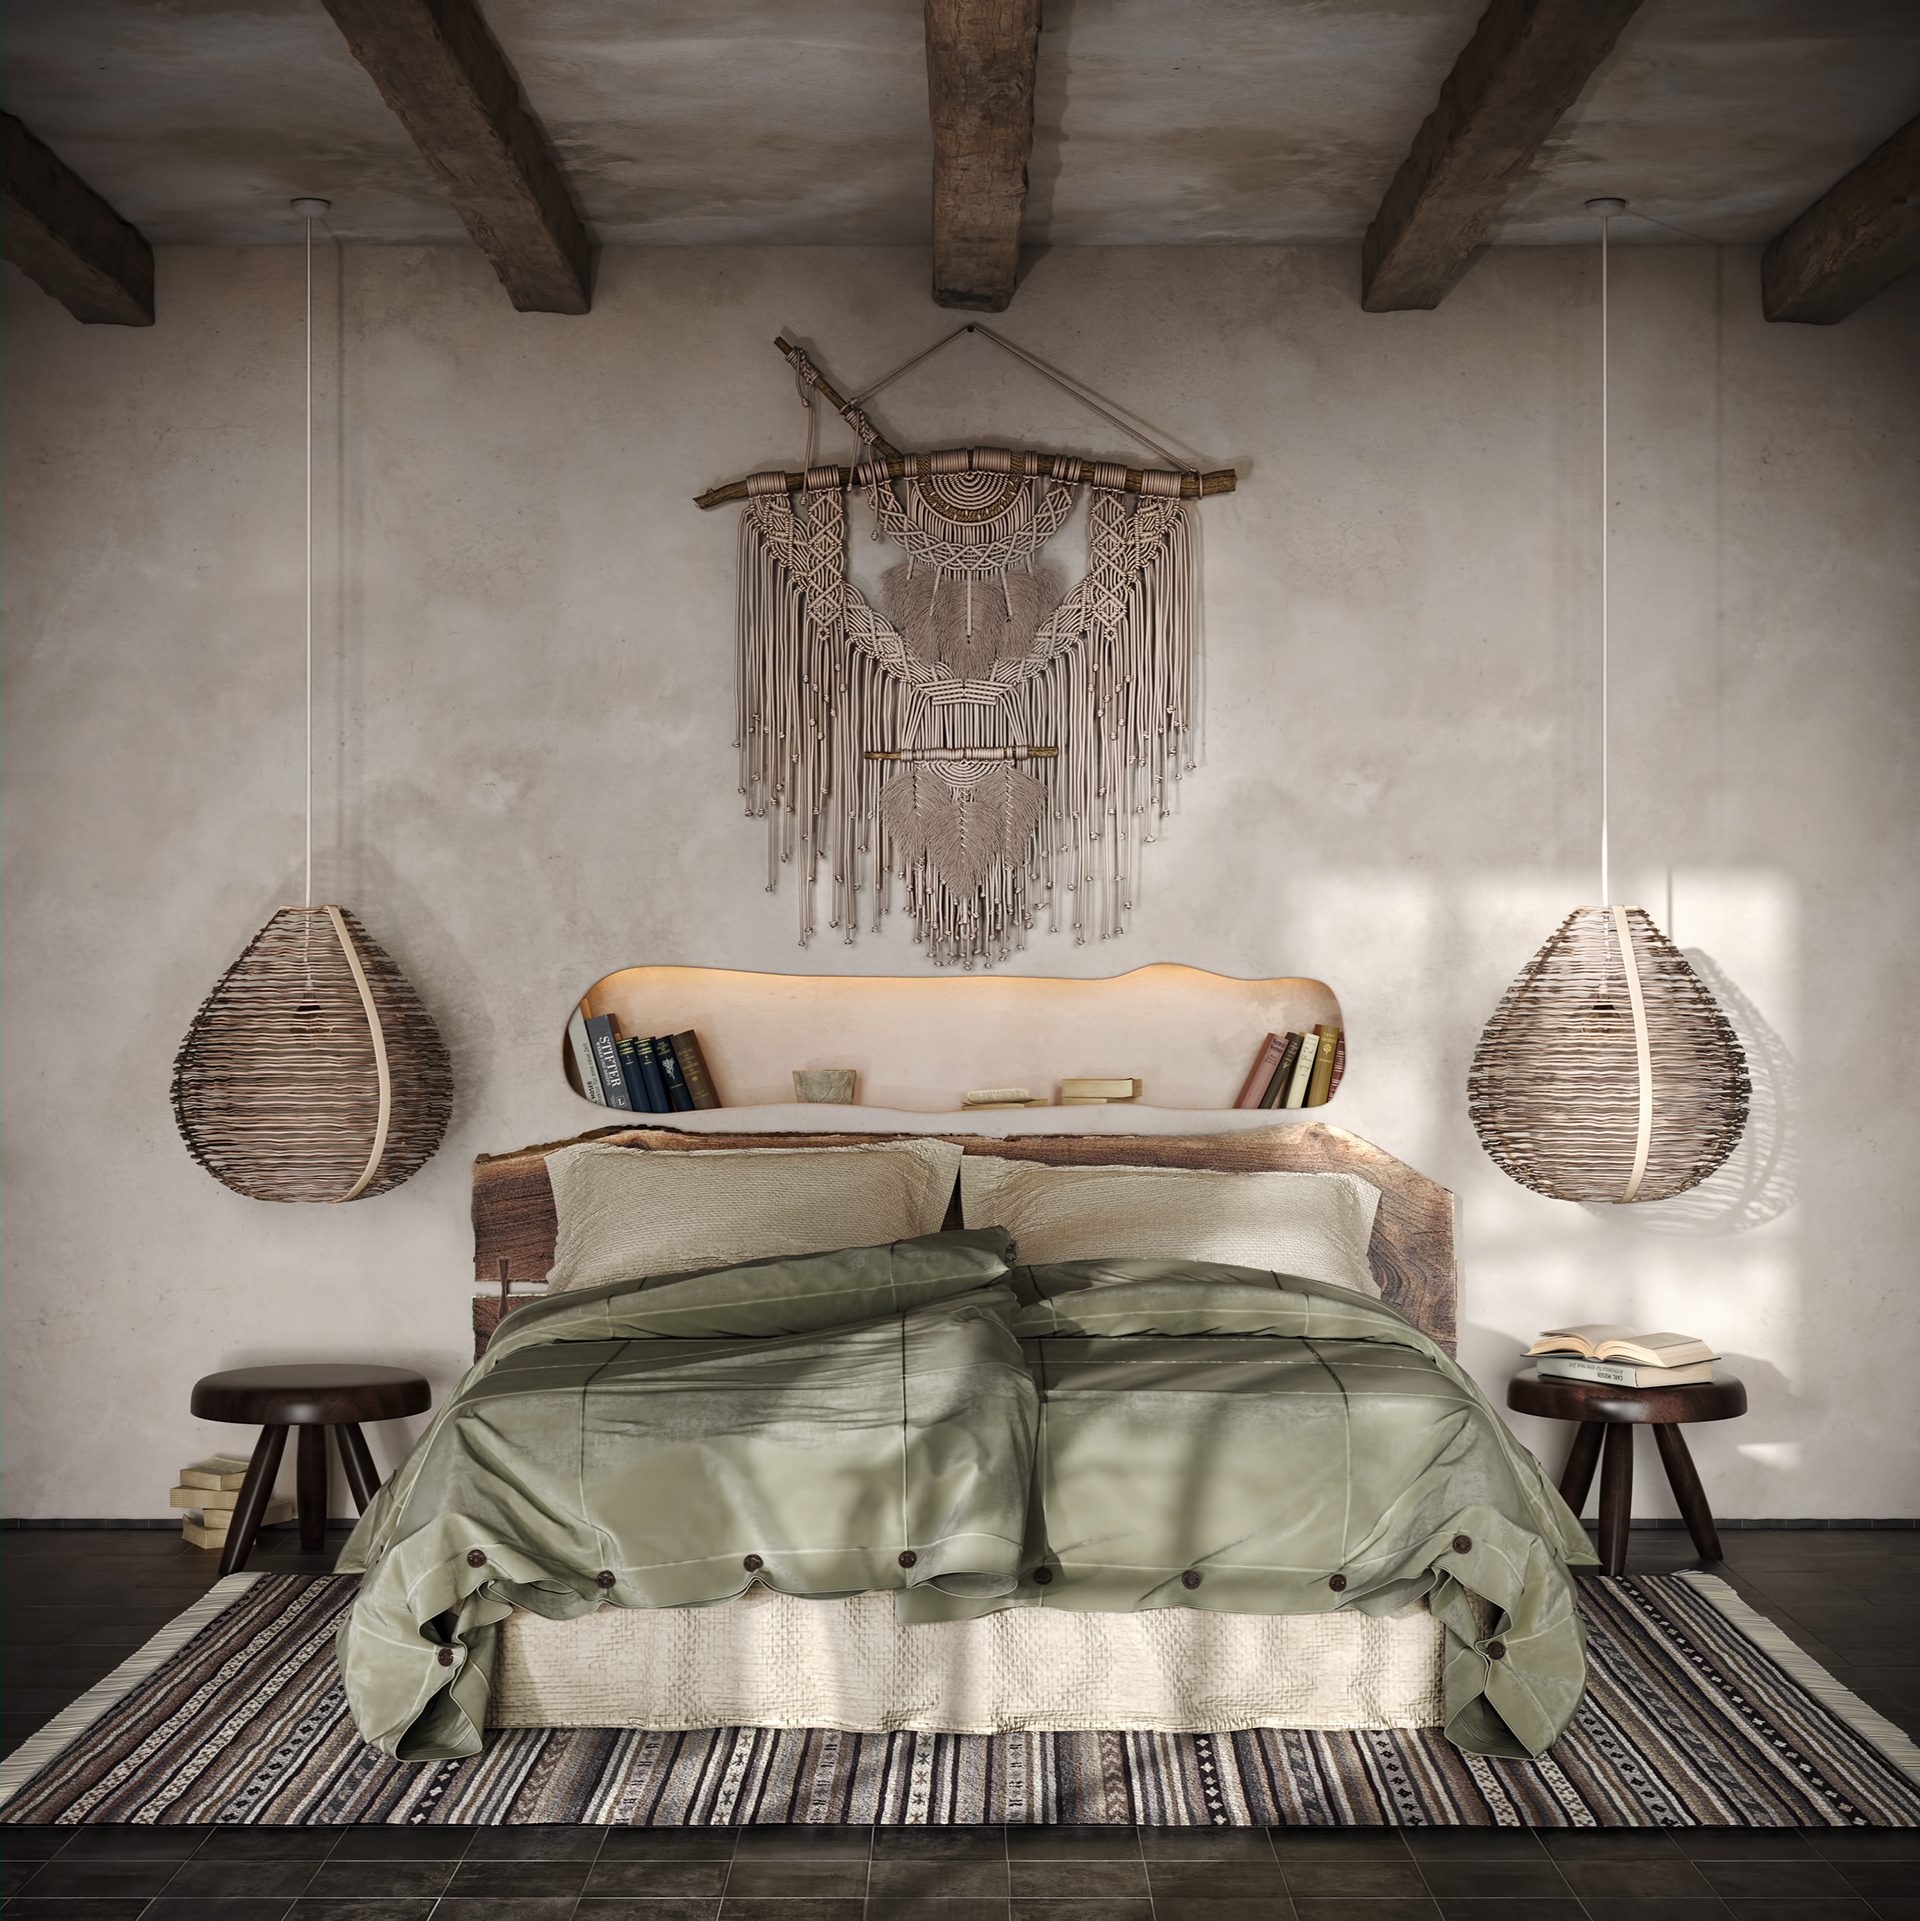 The wild and delicate features of this bedroom combine very nicely, giving the impression that it is an upgraded version of the cave of the ancient primitive people.